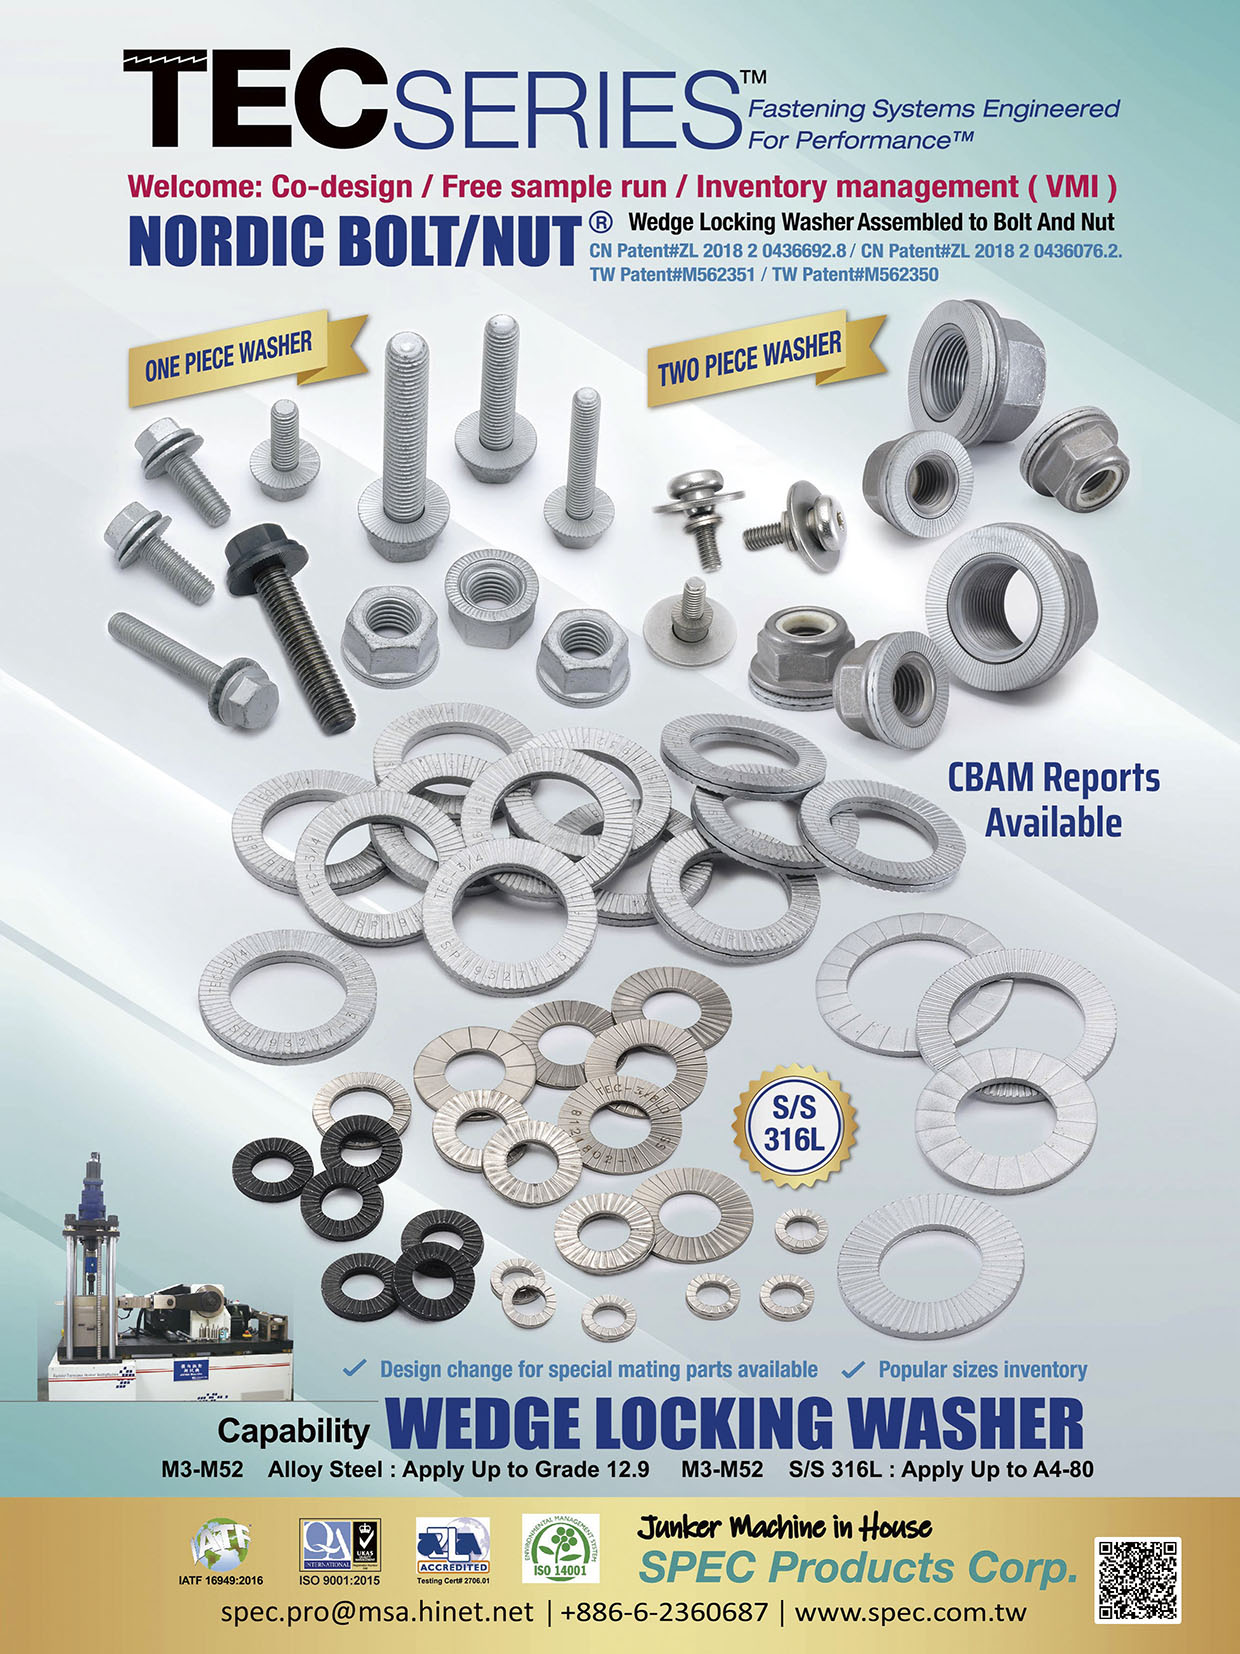 SPEC PRODUCTS CORP.  , Nordic Bolt / Nut, Wedge Locking Washer Assembled to Bolt and Nut